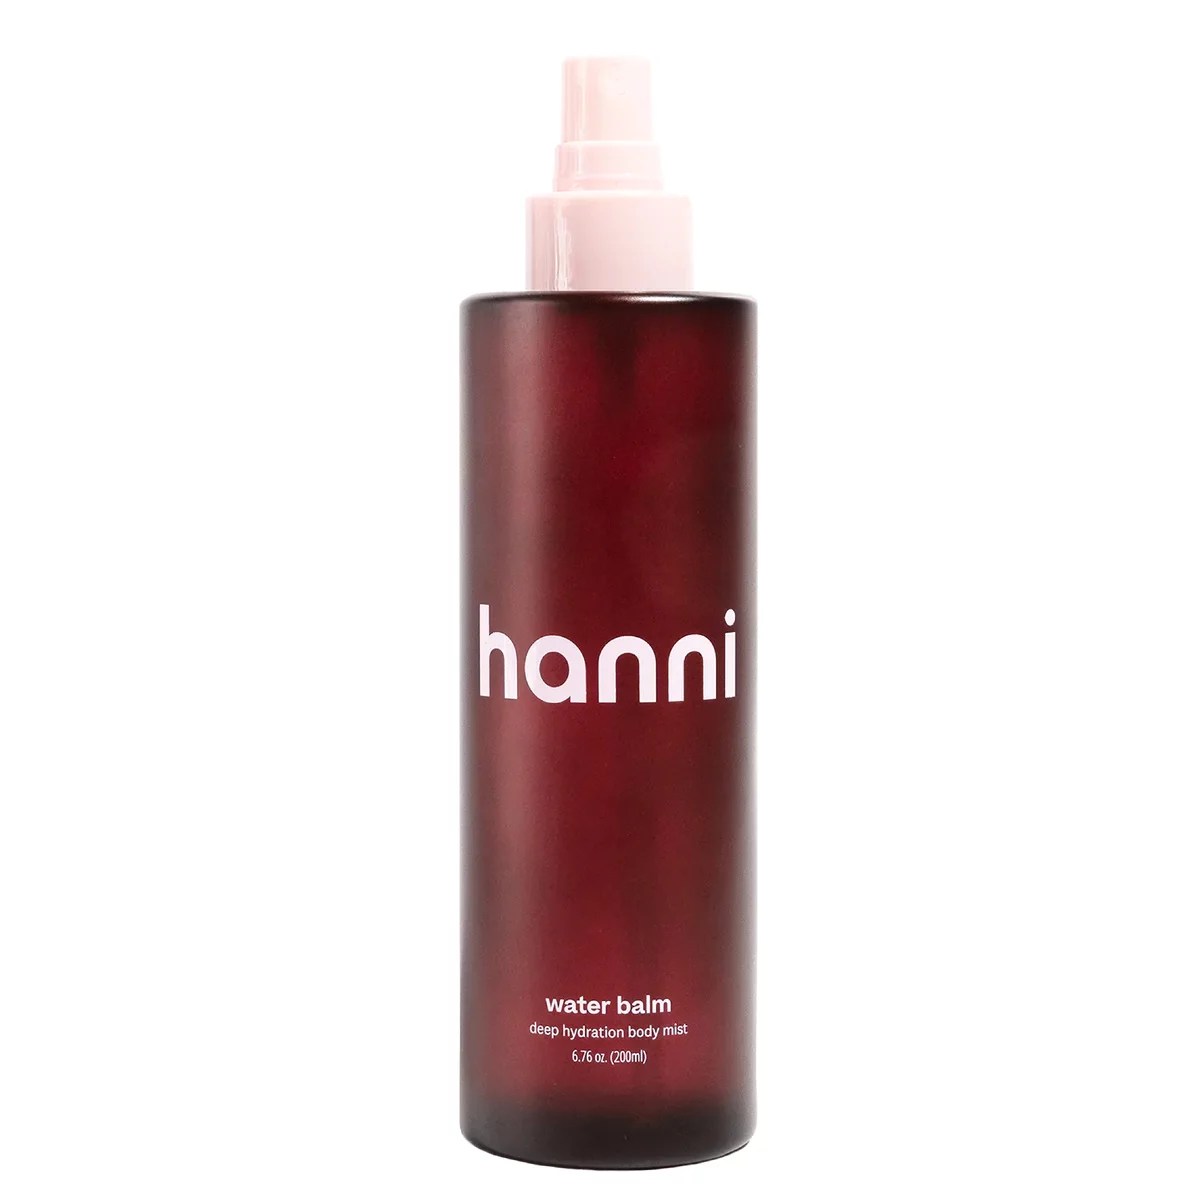 A blow bottle with the Hanni Water Balm.